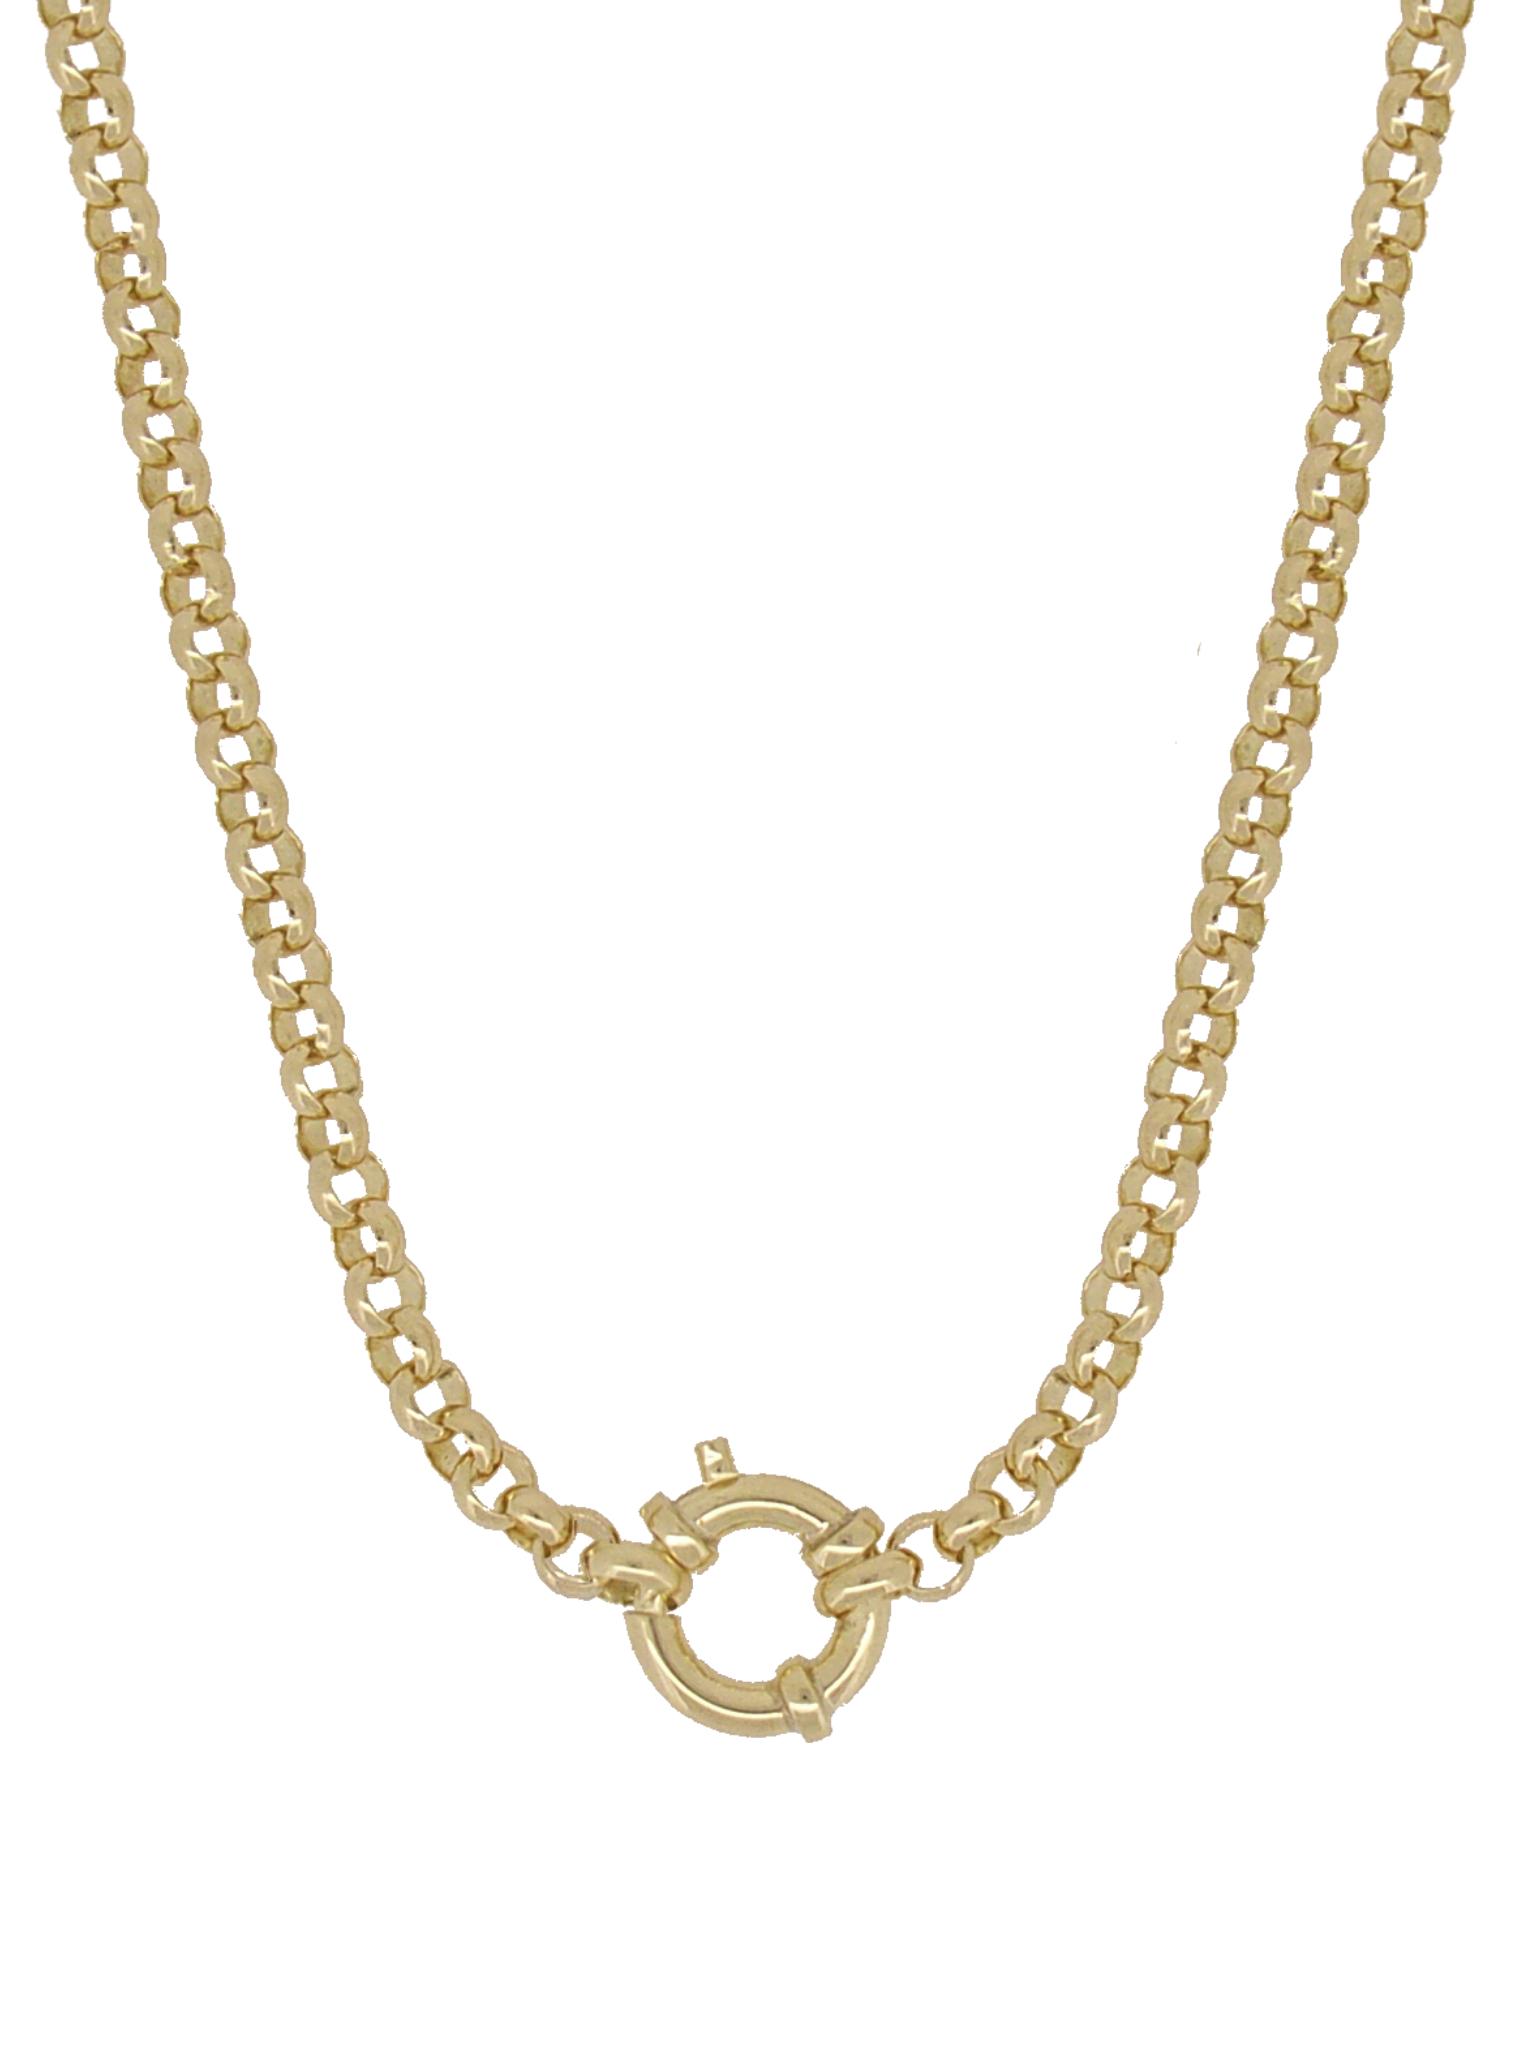 50cm Belcher Chain Necklace in 9ct Yellow Gold